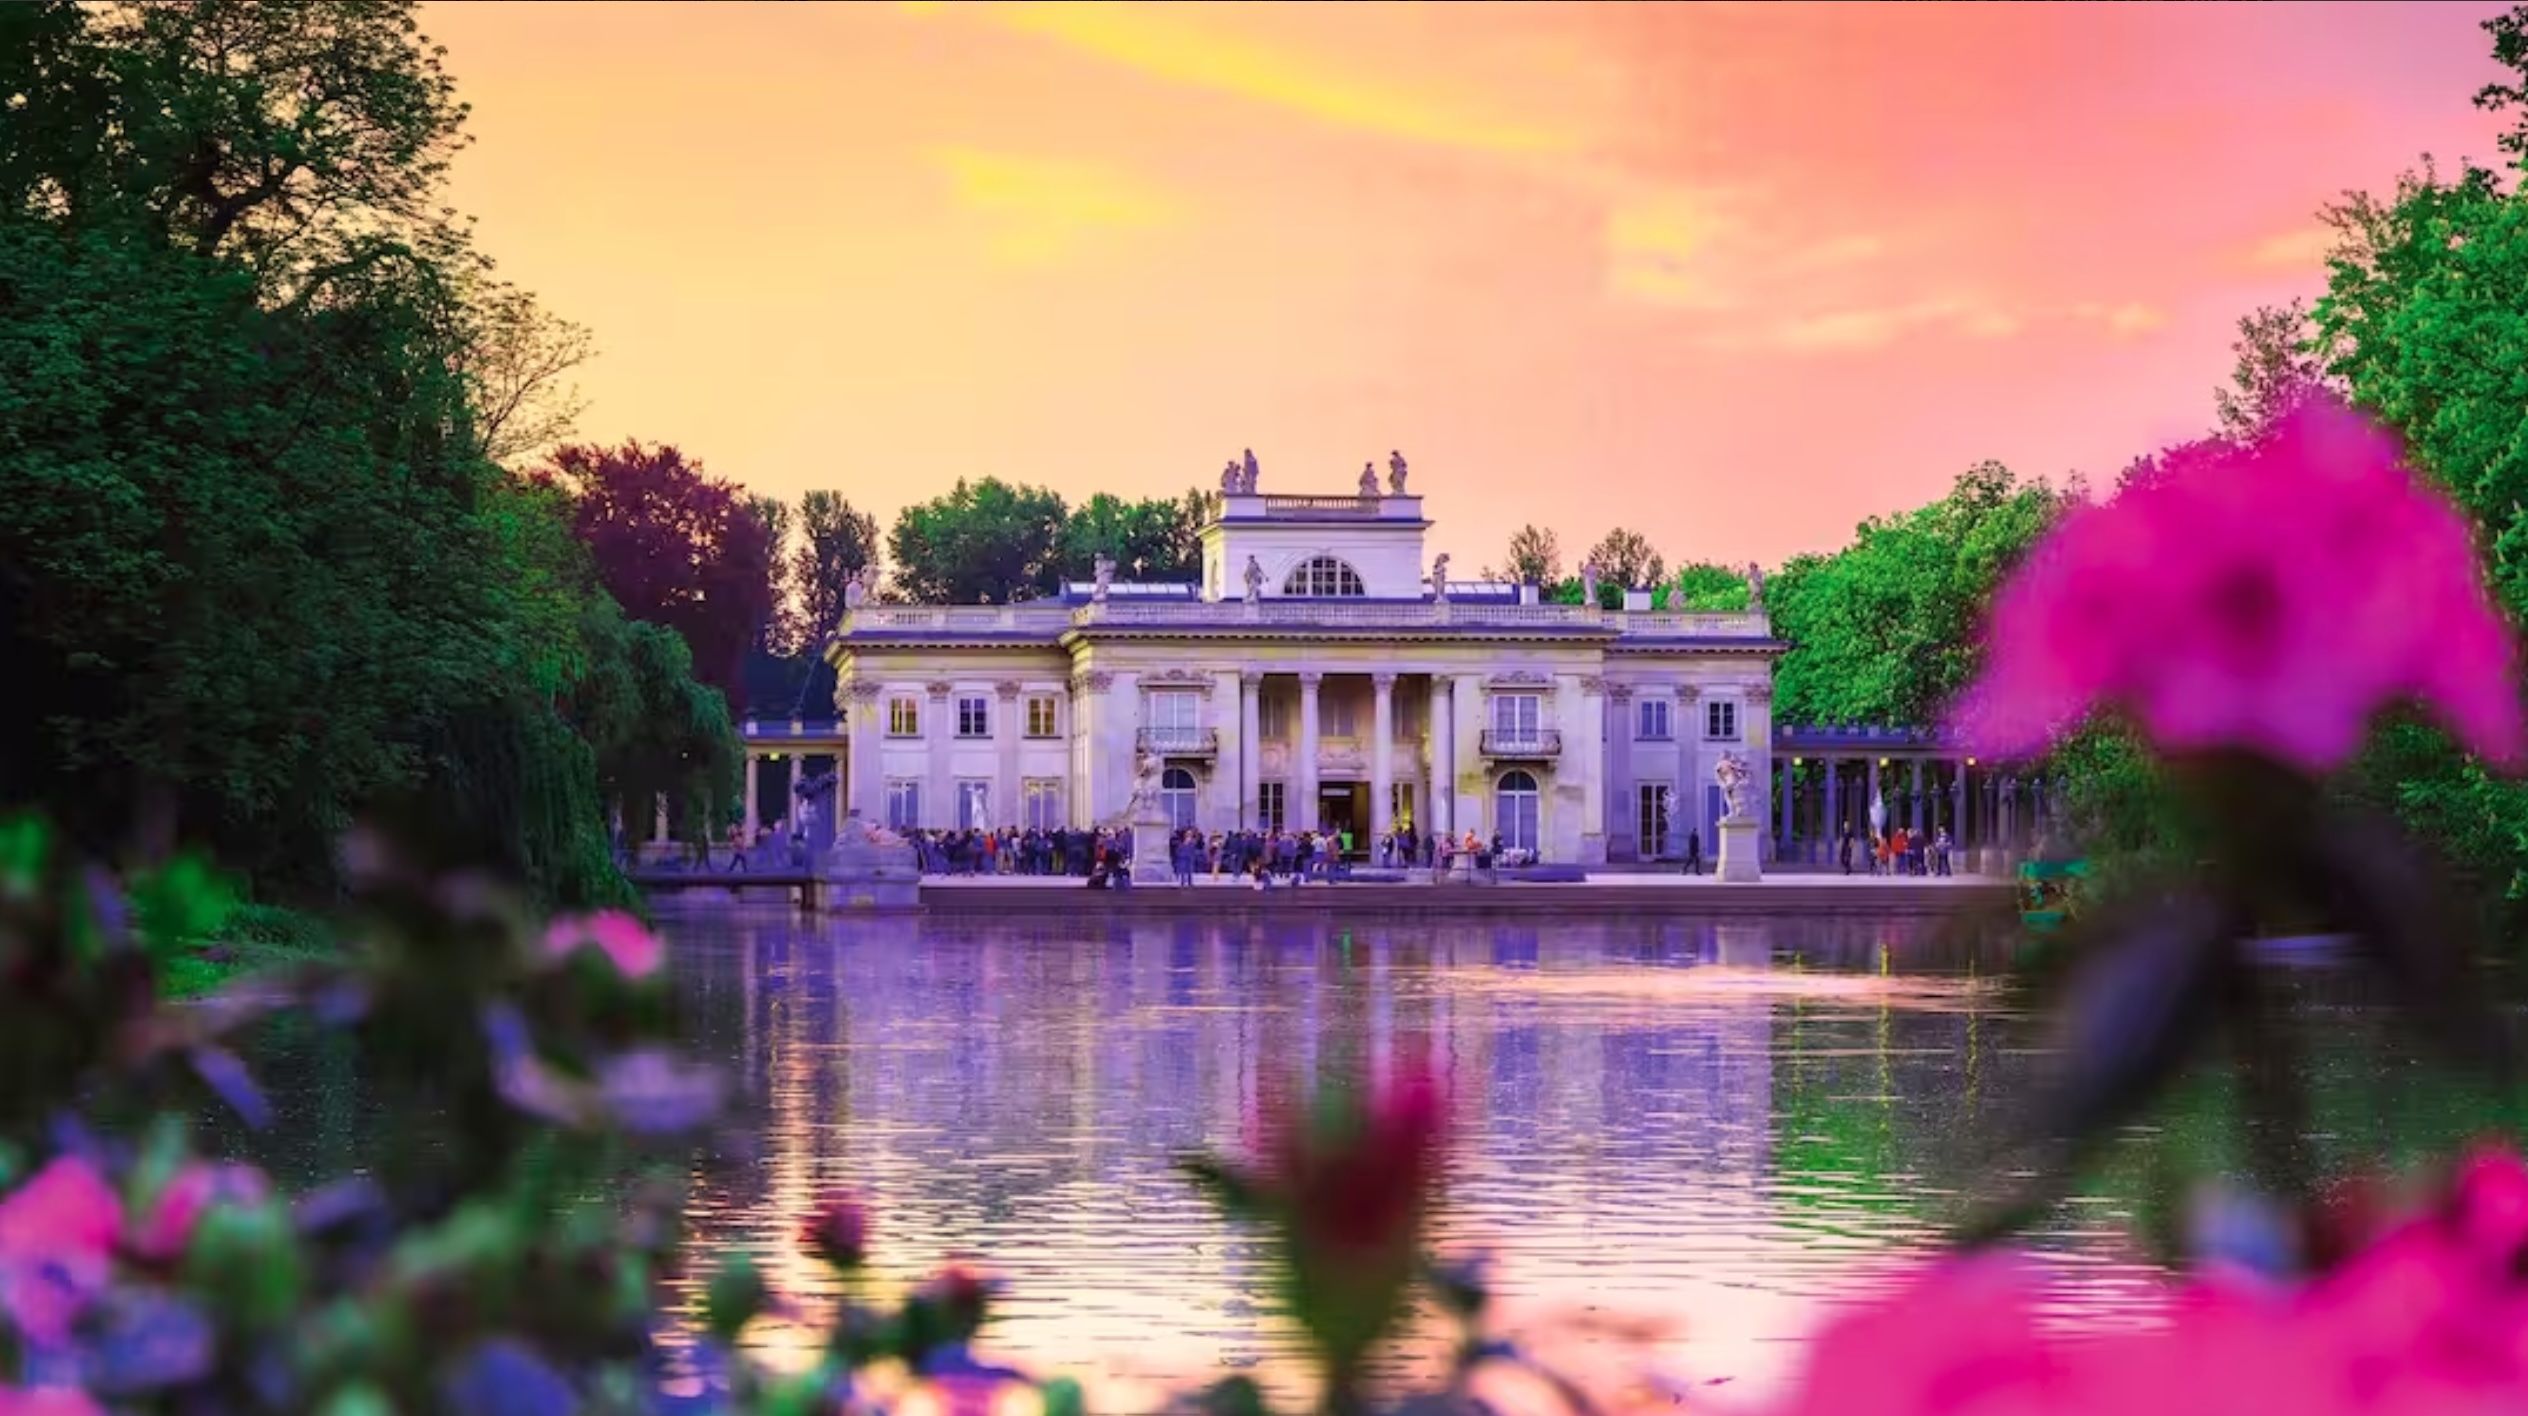 Royal Palace on the Water in Lazienki Park, Warsaw, Poland